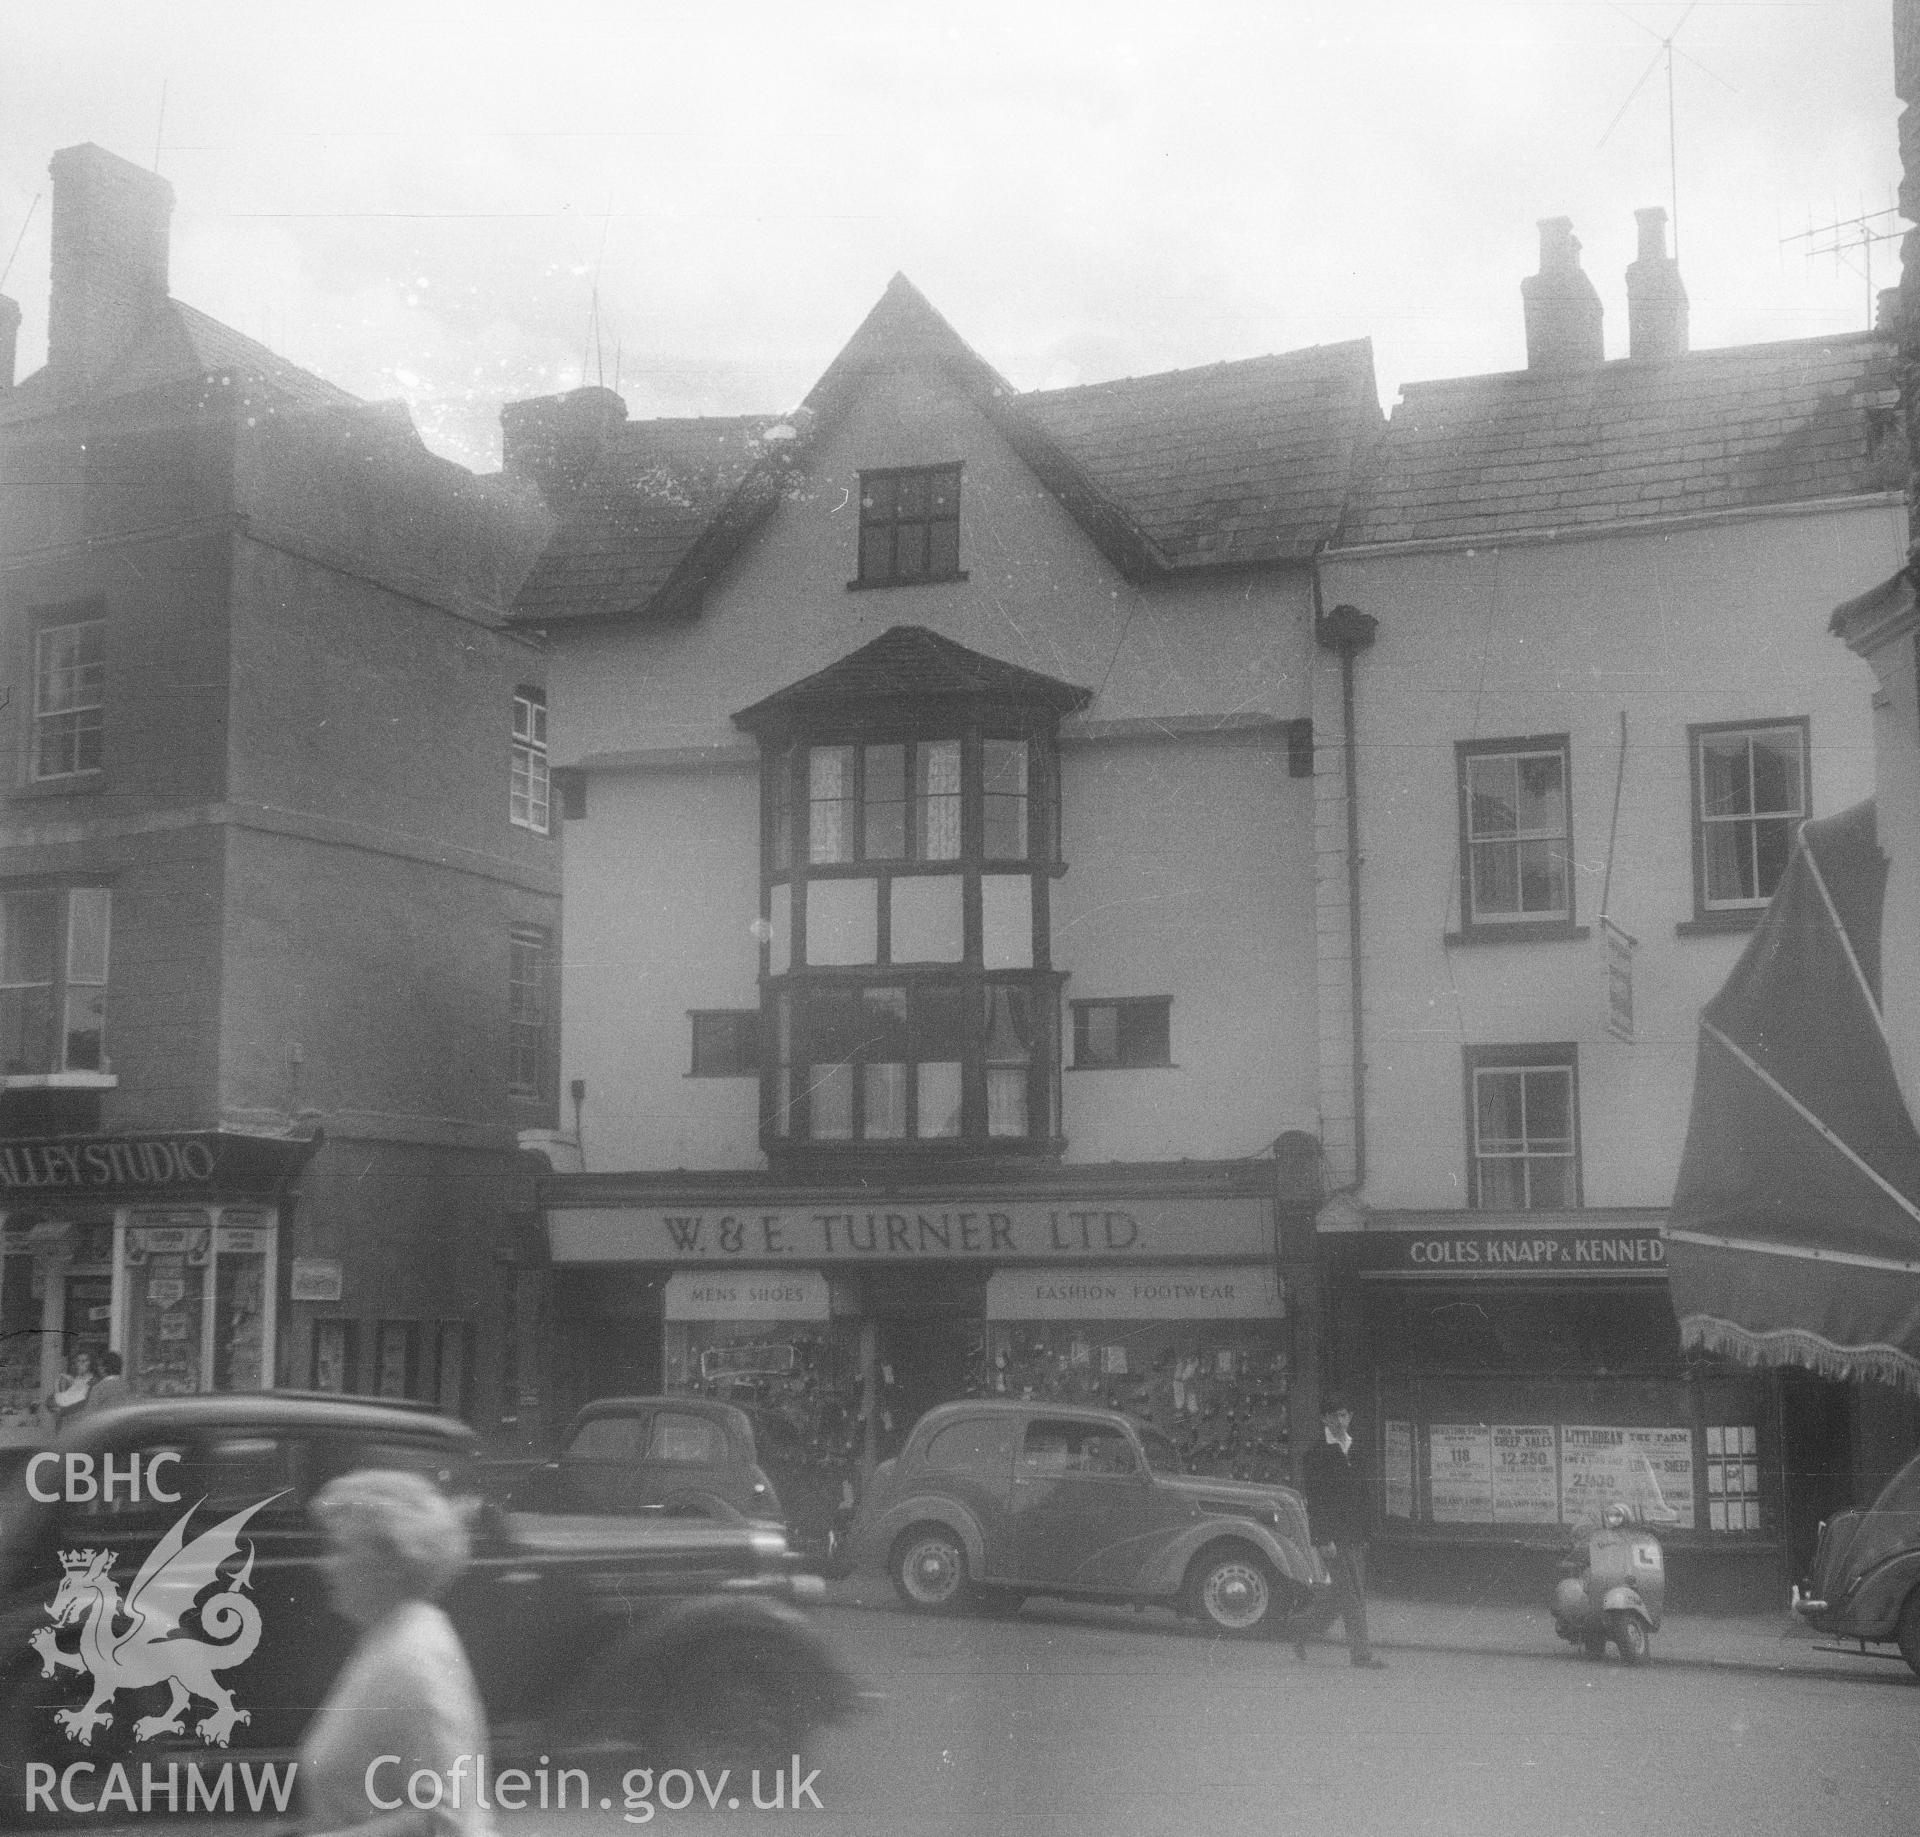 Digital copy of a black and white nitrate negative, exterior view of half-timbered house in Monnow Street, Monmouth.